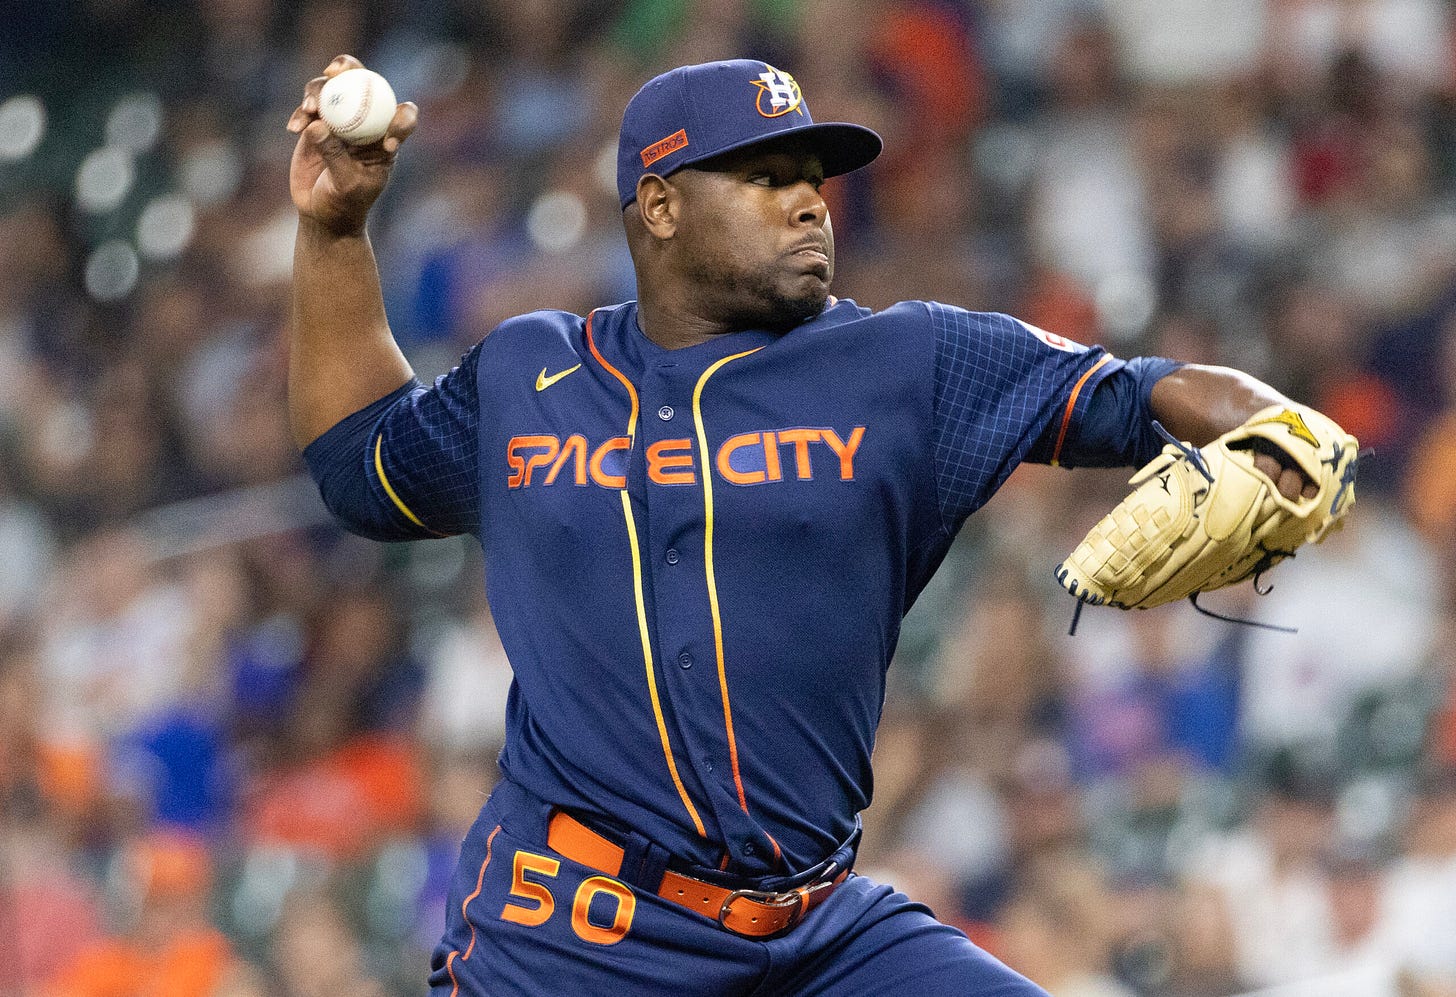 MLB Trade Rumors on X: "Hector Neris Declines Player Option With Astros  https://t.co/TTbmnTVcEN https://t.co/UWhVqgd6xJ" / X